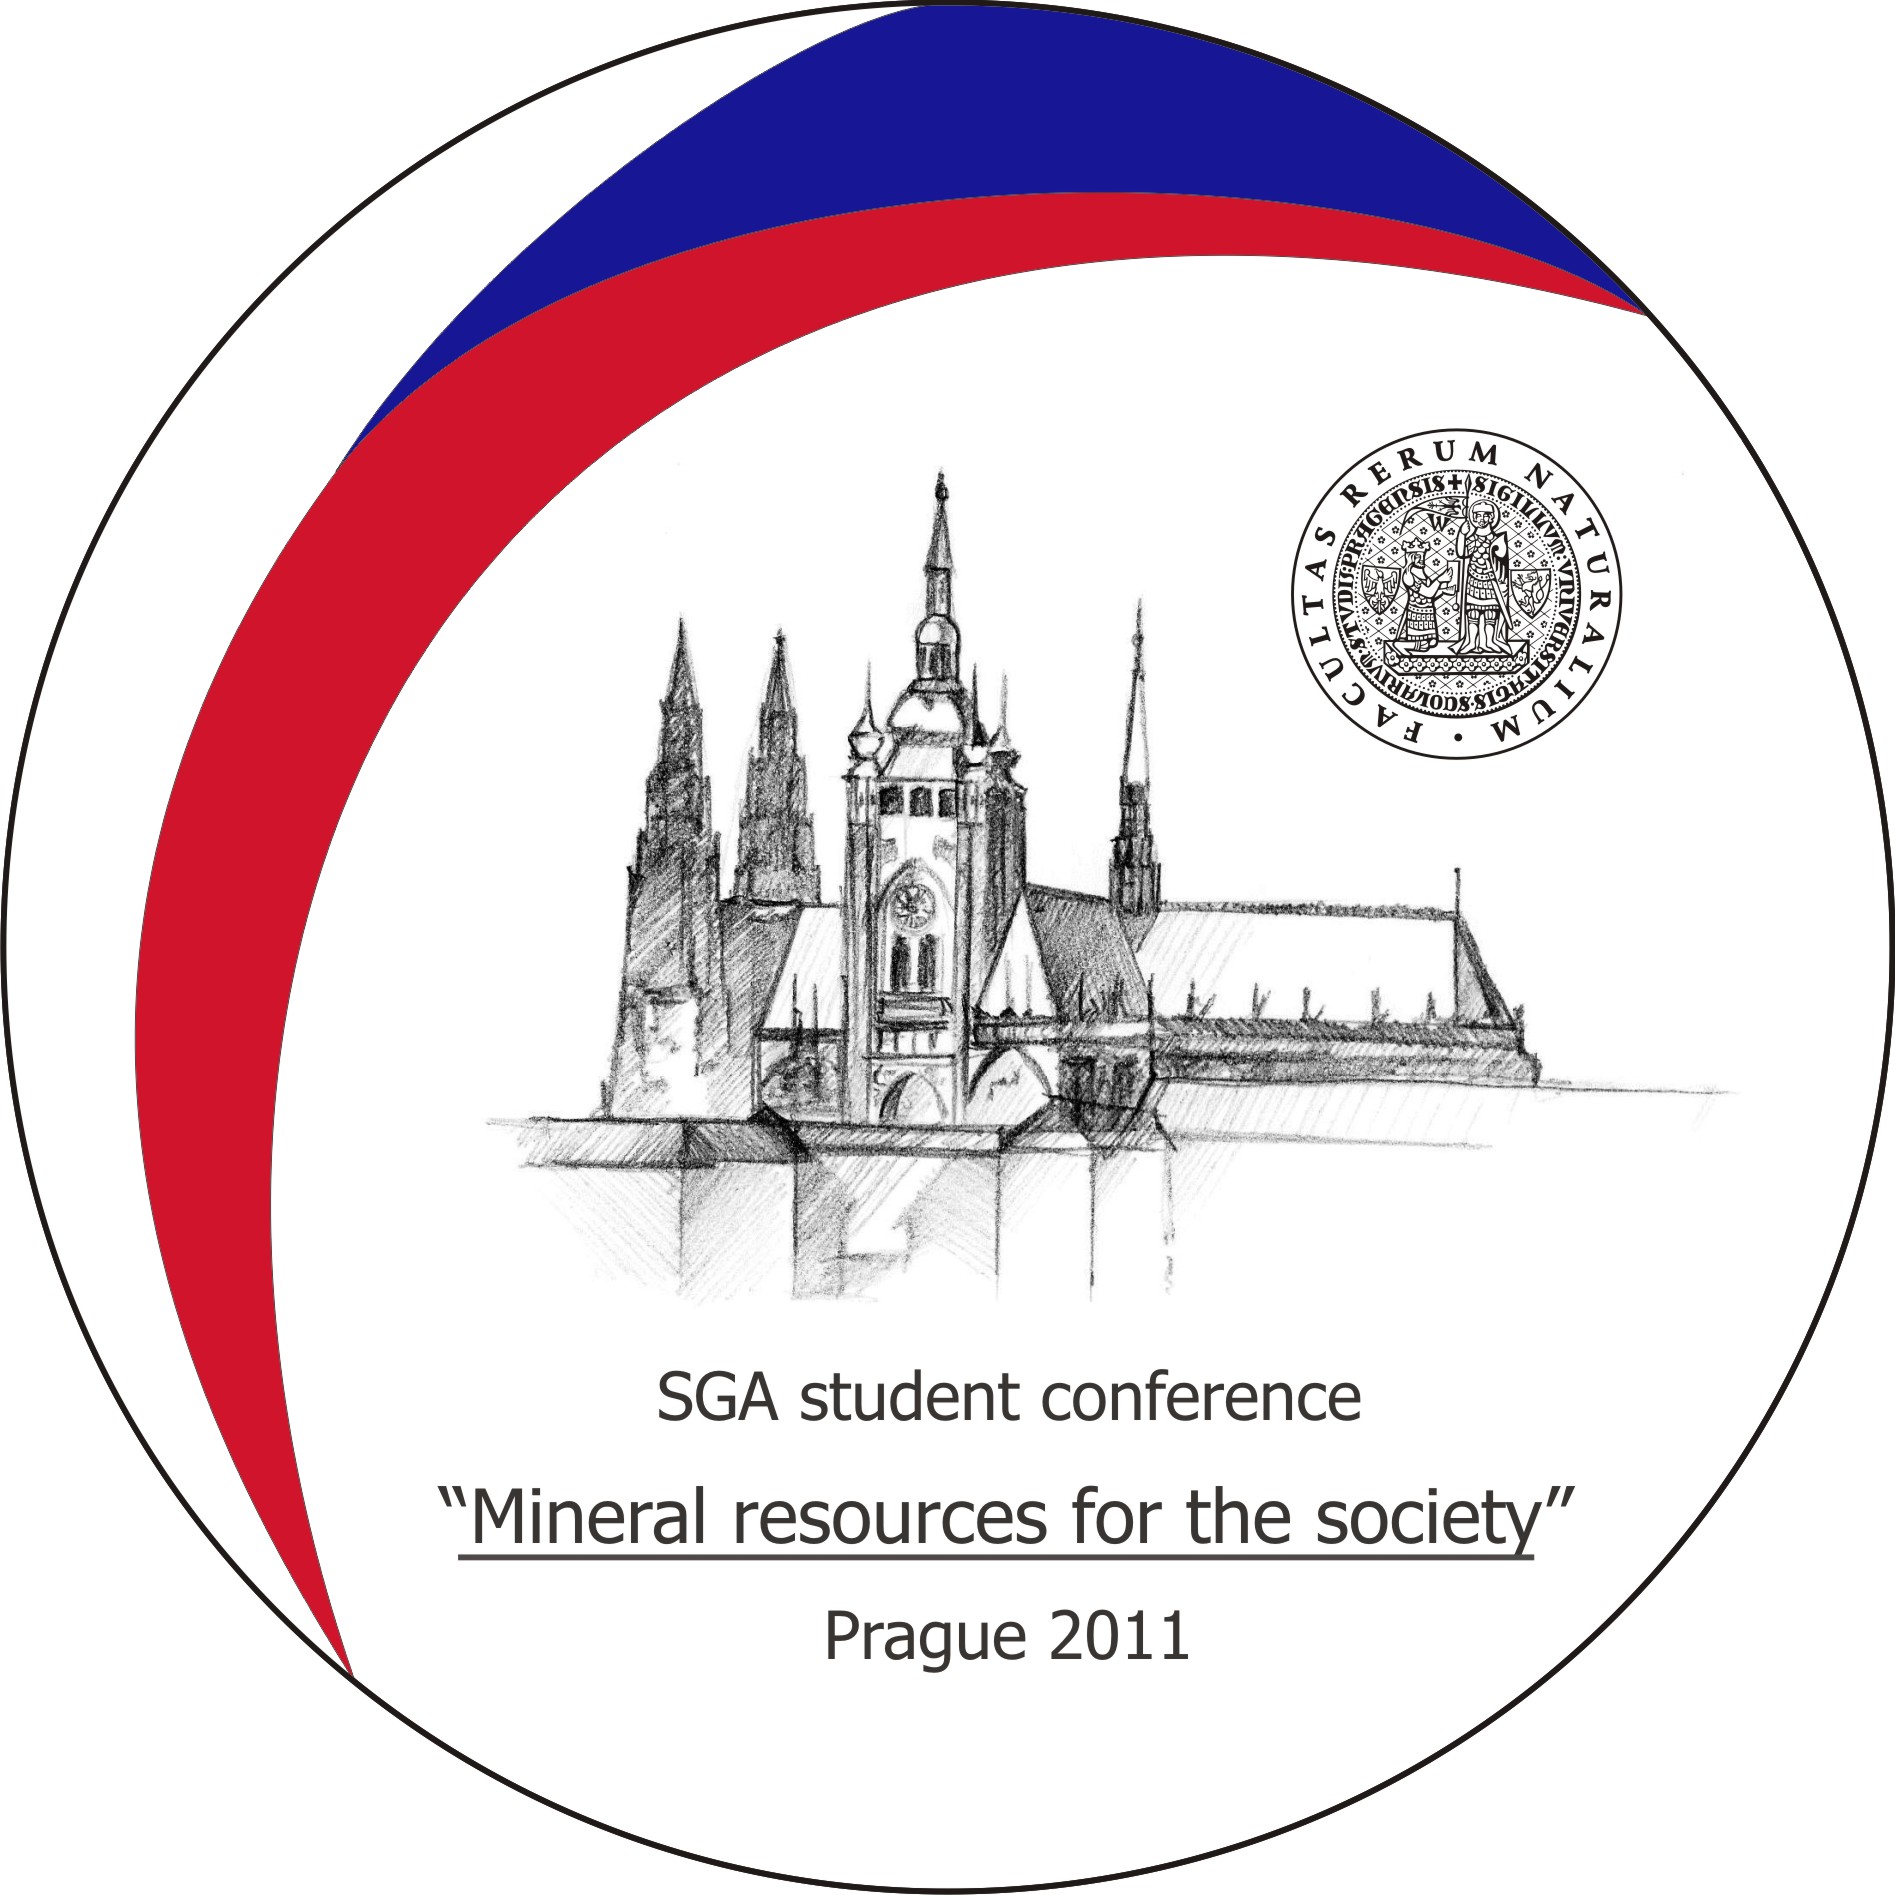 SGA Student Conference "Mineral resources for the society"